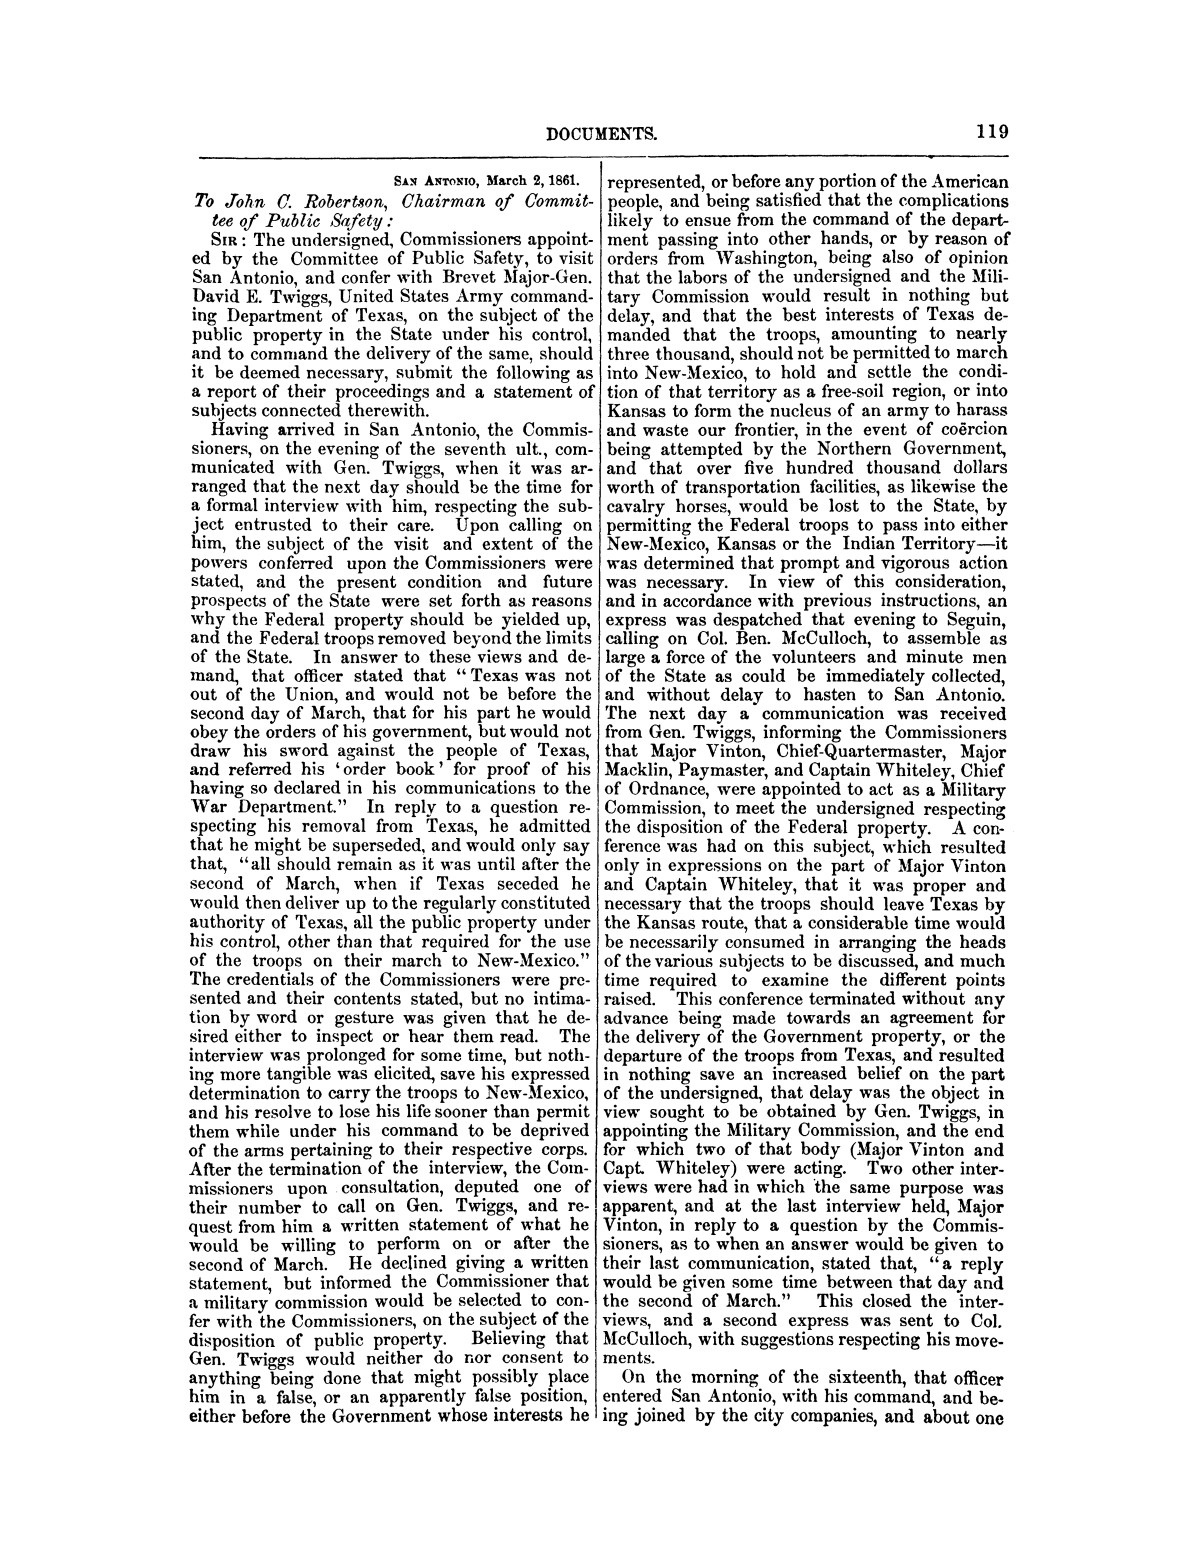 The treachery in Texas, the secession of Texas, and the arrest of the United States officers and soldiers serving in Texas. Read before the New-York Historical Society, June 25, 1861. By Major J. T. Sprague, U. S. A.
                                                
                                                    [Sequence #]: 13 of 36
                                                